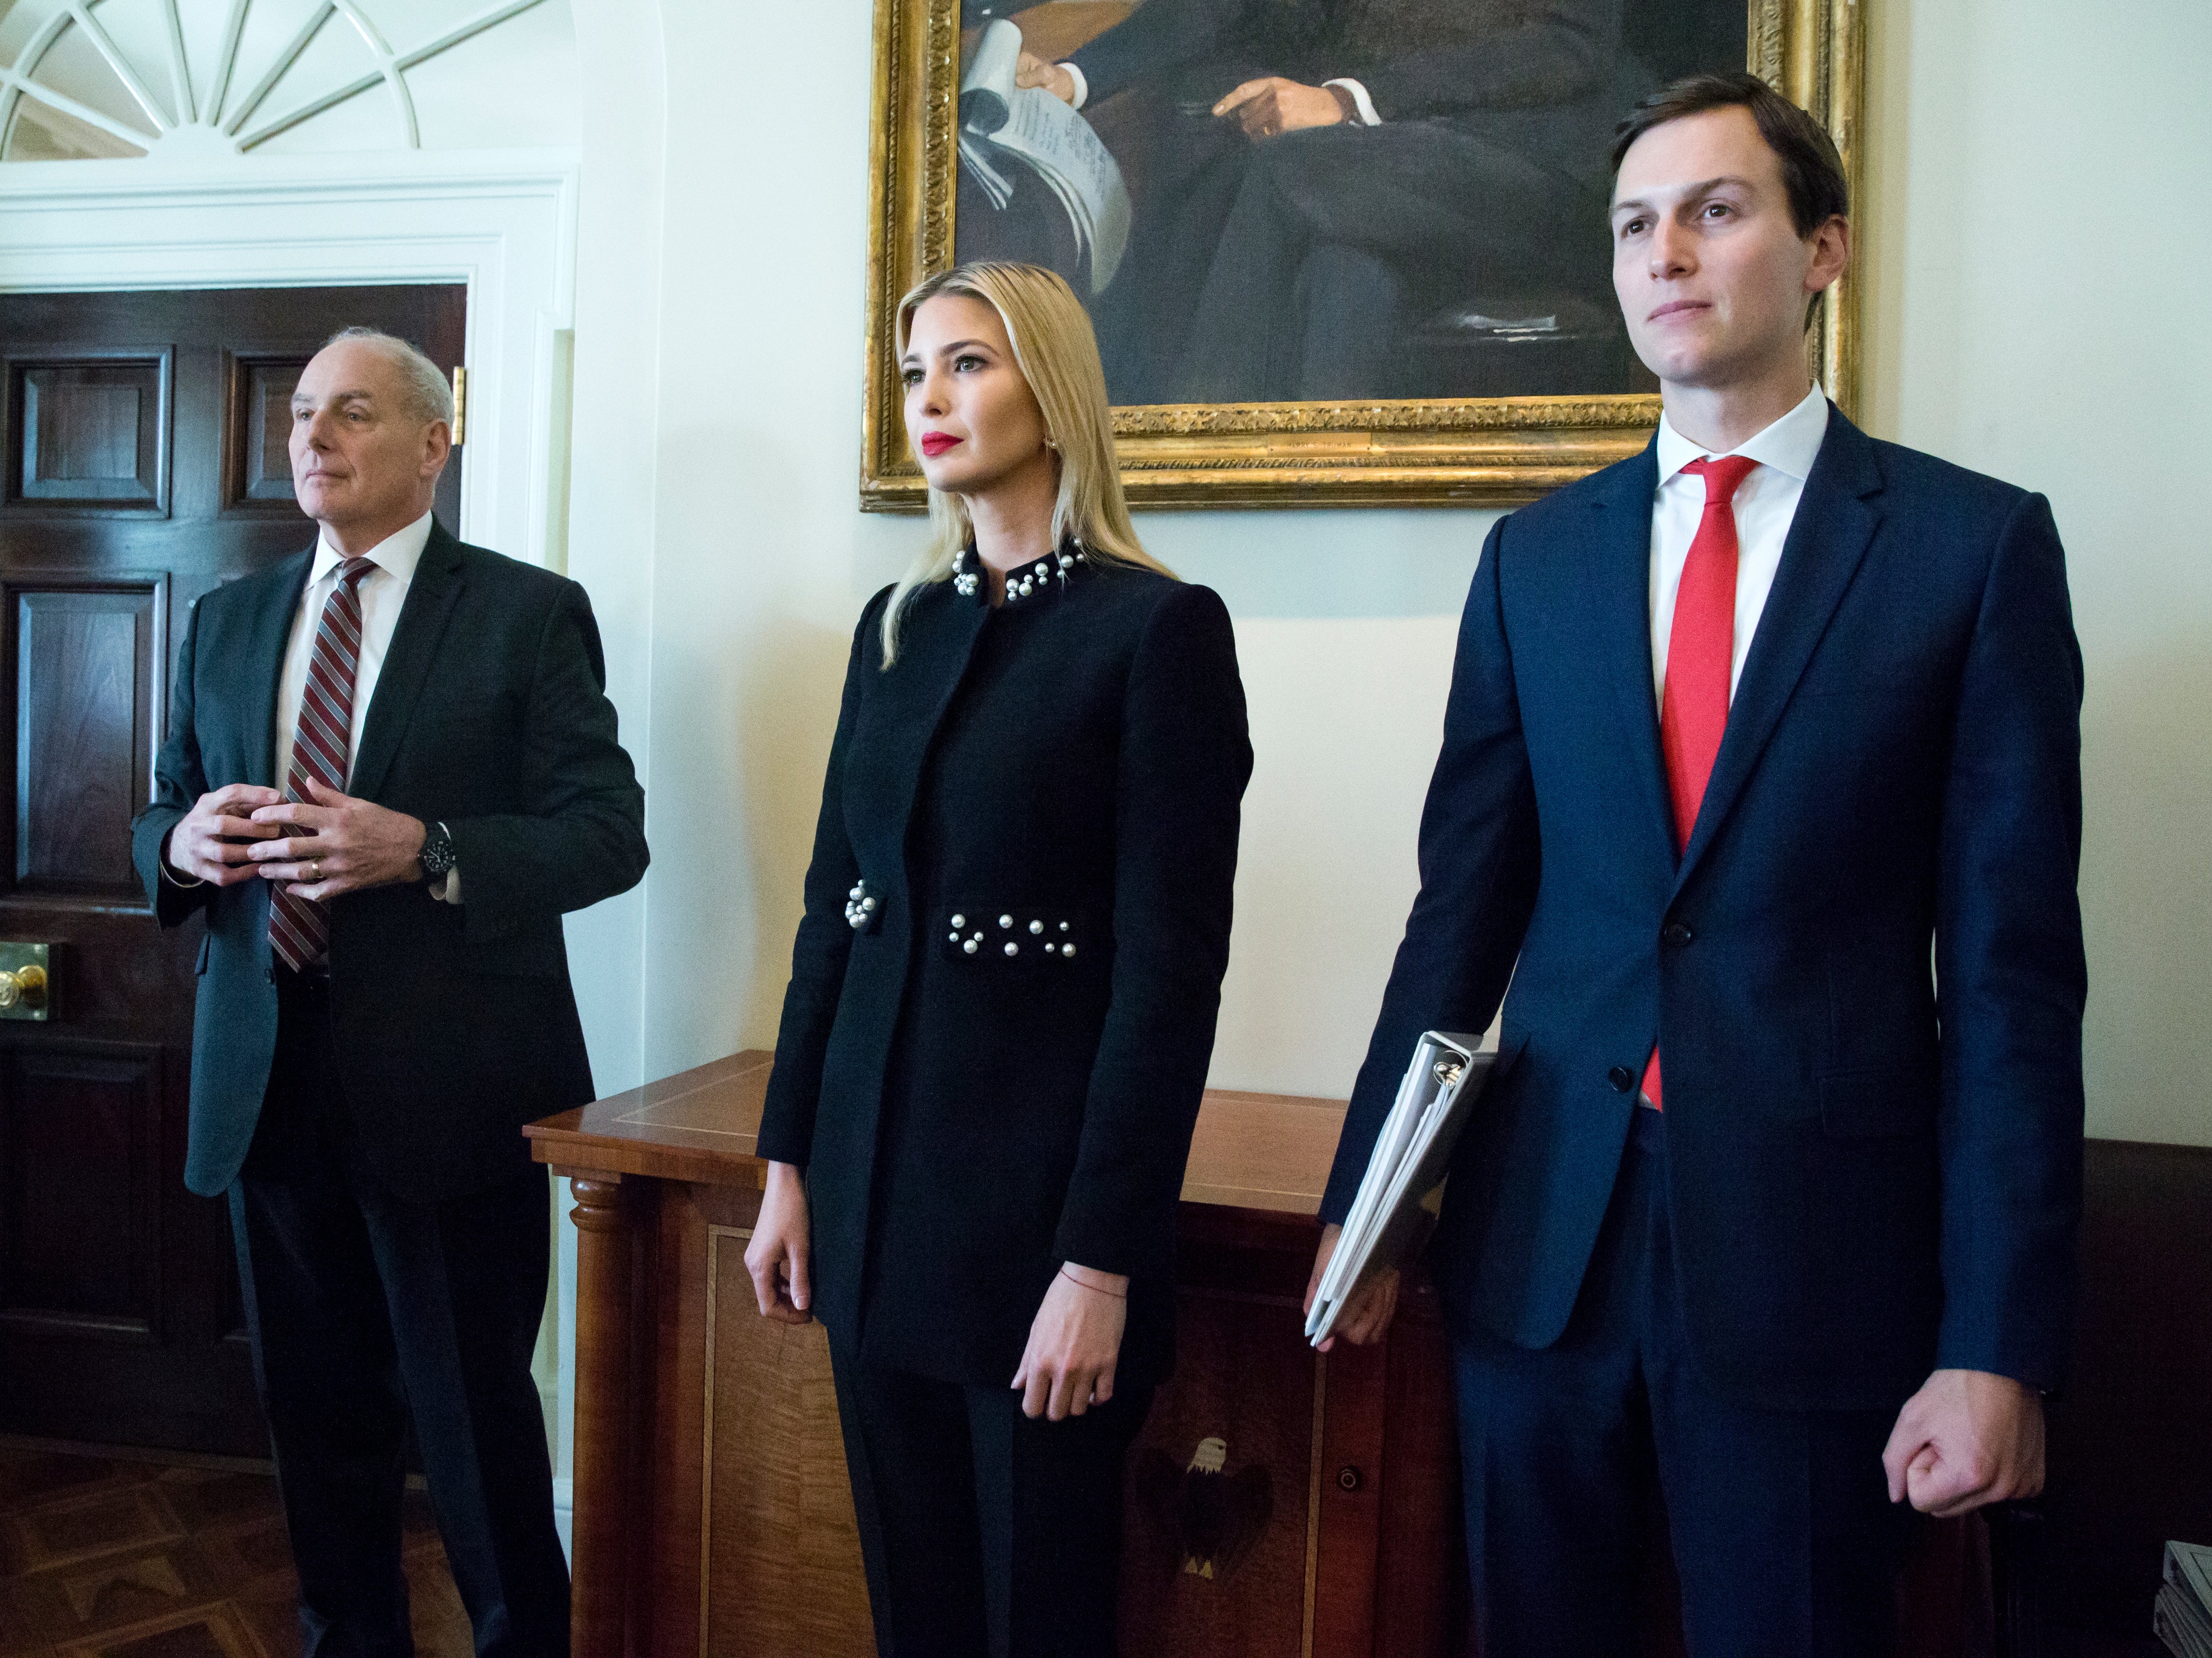 White House Senior Advisor Jared Kushner (R), First daughter Ivanka Trump (C) and White House Chief of Staff John Kelly (L) attend a meeting held by US President Donald J. Trump